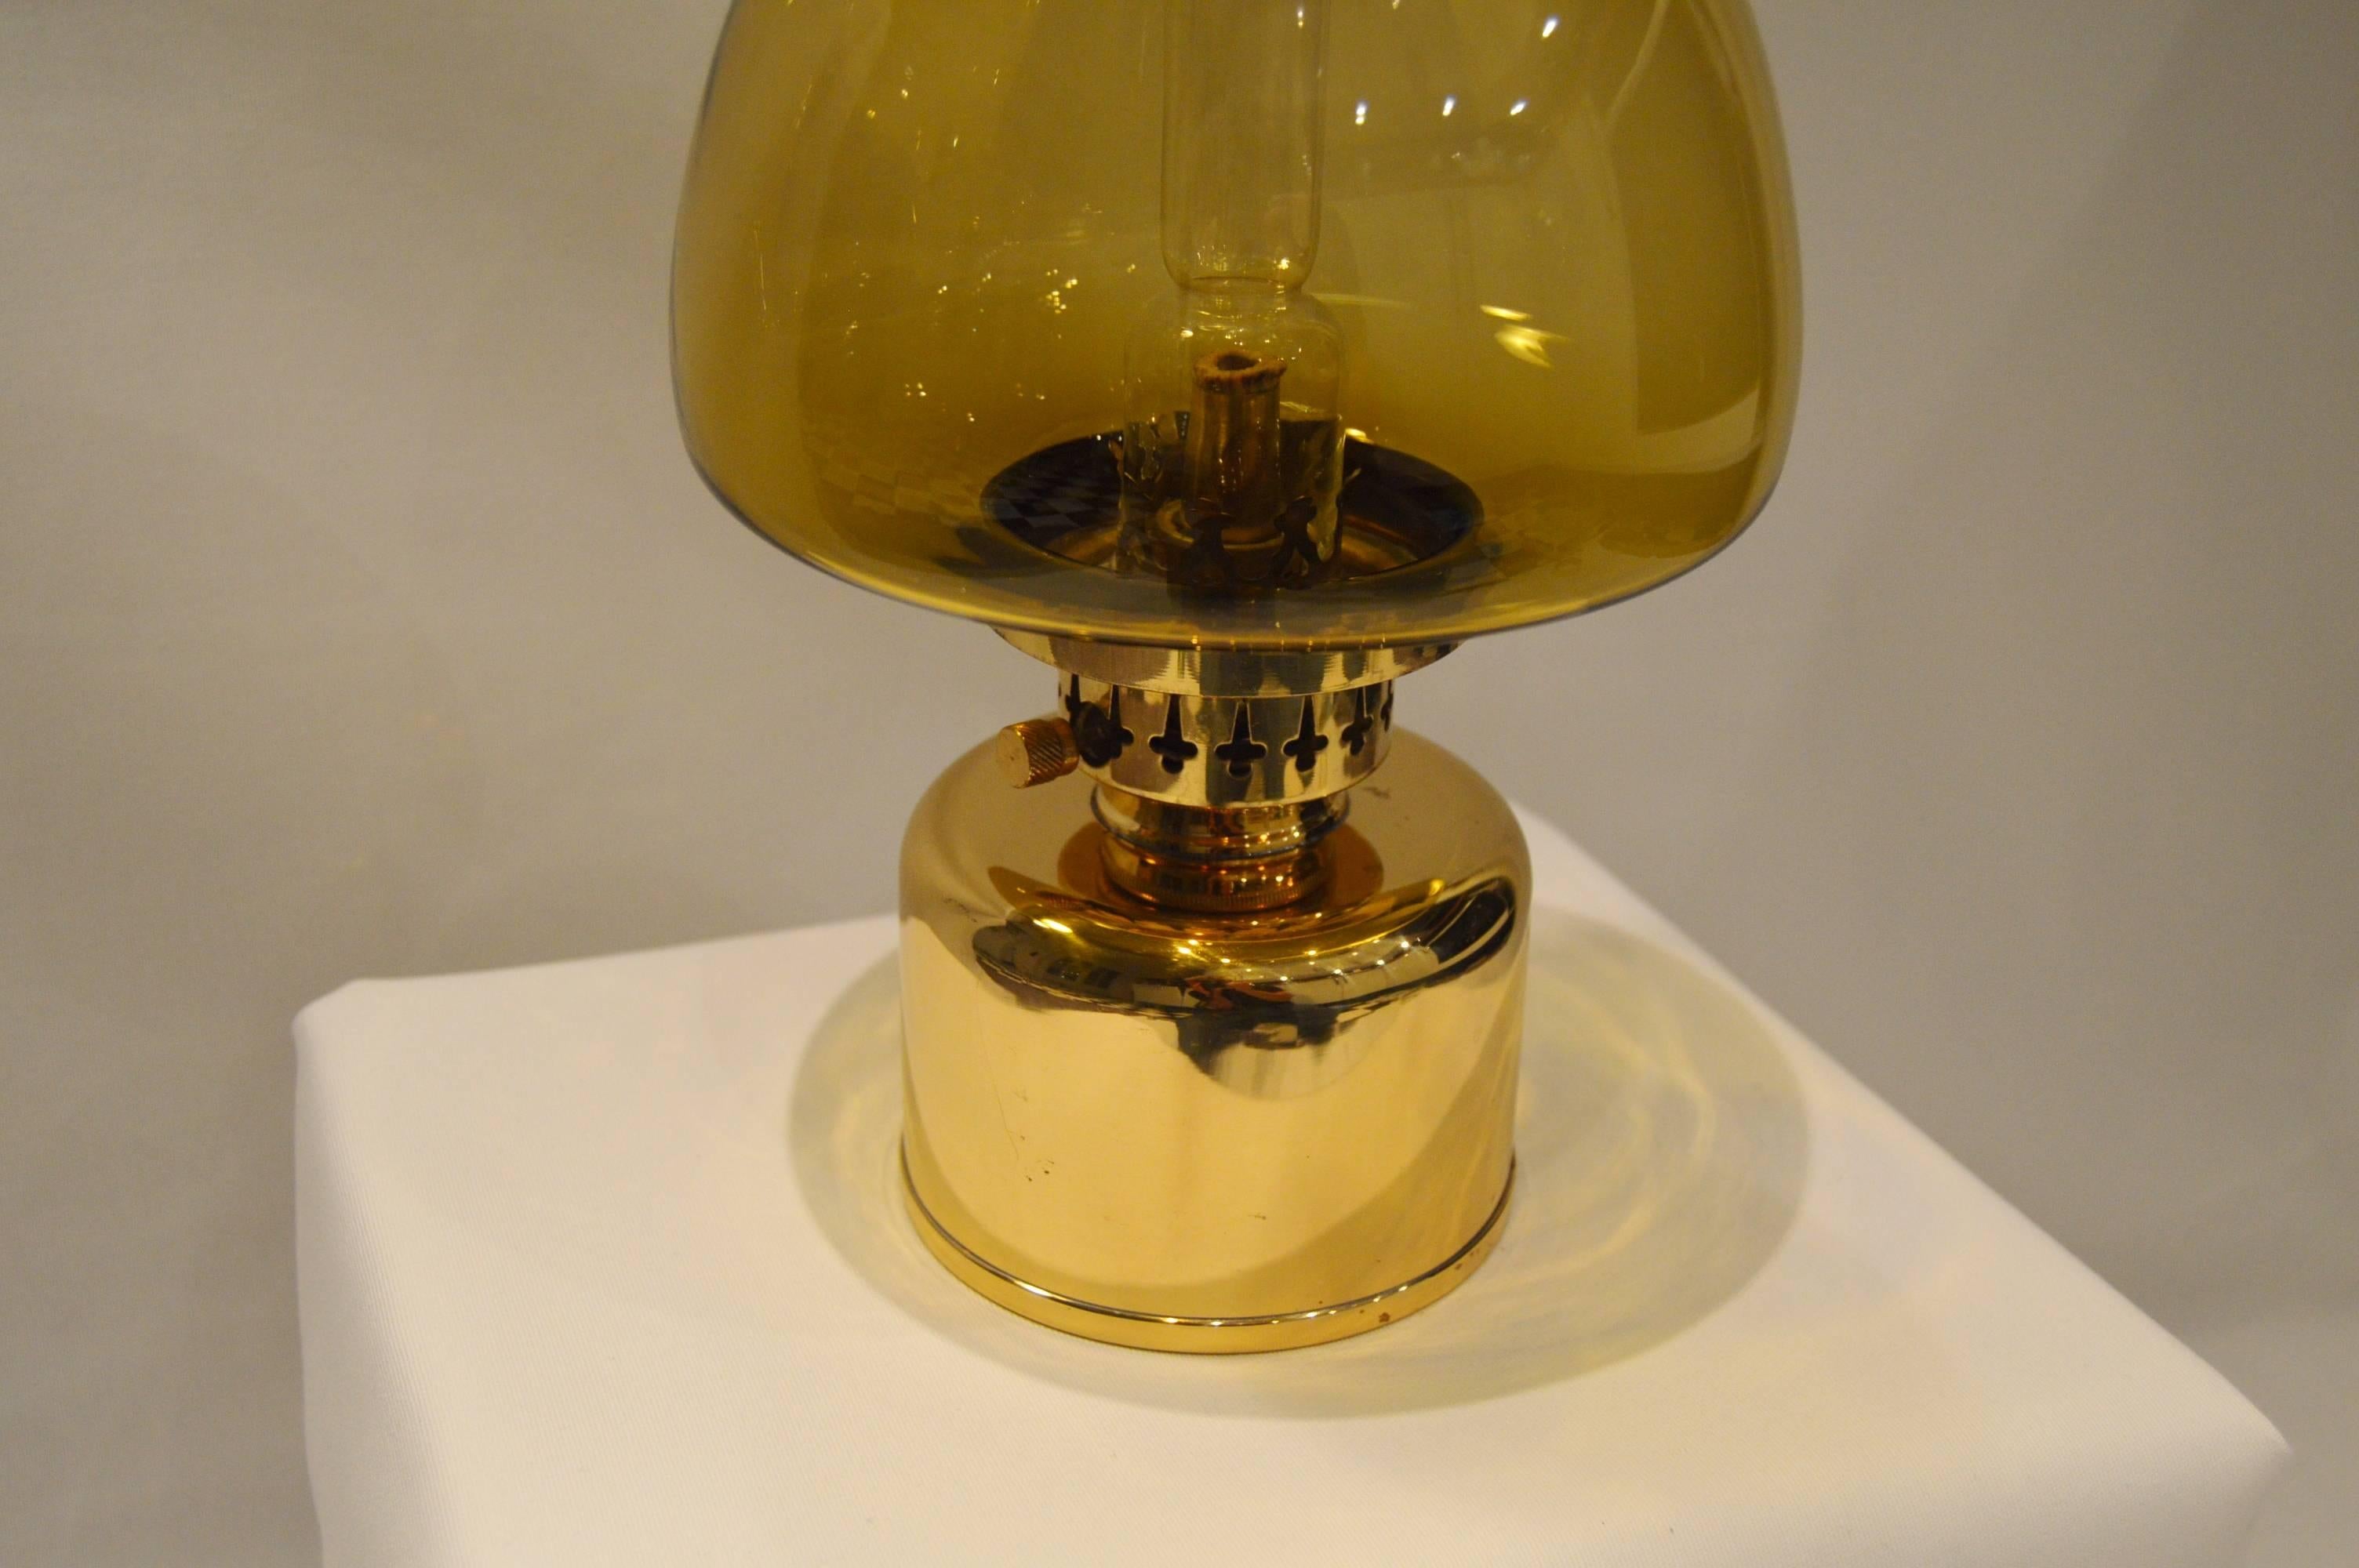 Elegant and rare kerosene lamp, even called oil lamp. Designed by Hans-Agne Jakobsson for his own company Hans-Agne Jakobsson AB in Markaryd, Sweden.

- Gold yellow glass and brass.
- Excellent vintage condition with nice patina on the brass.
-